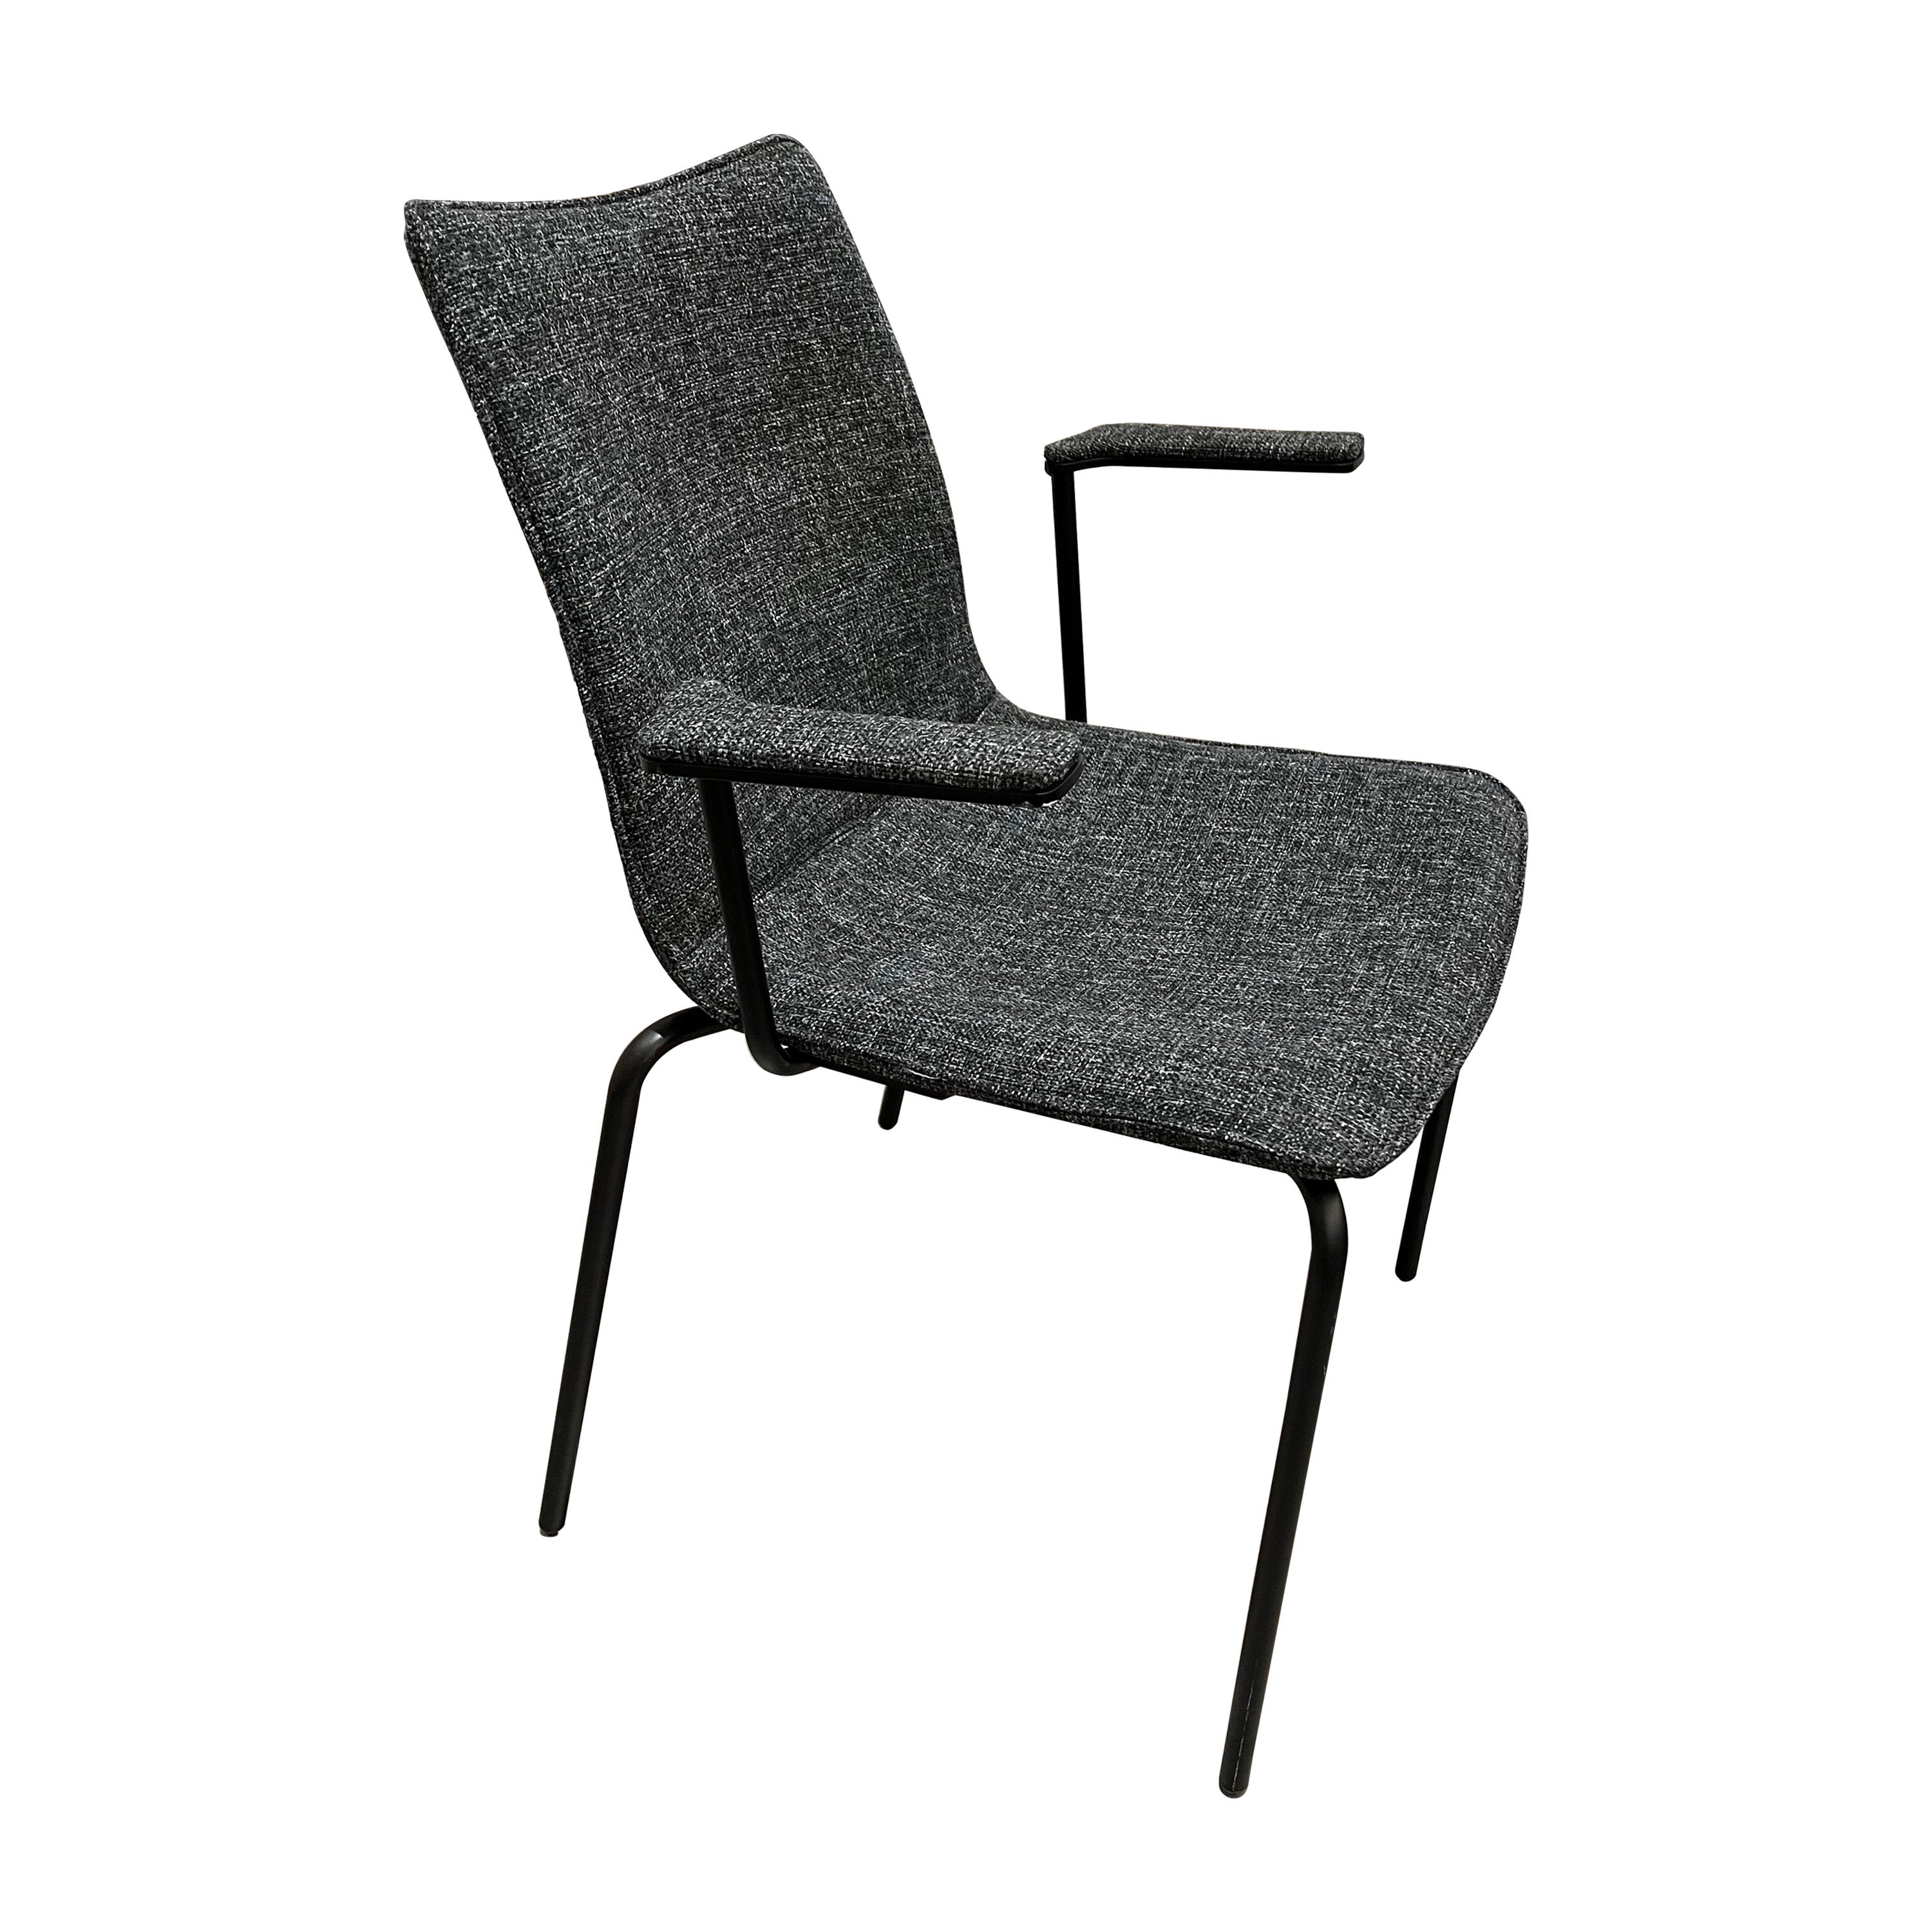 M2L Miss Chair in STOCK im Angebot